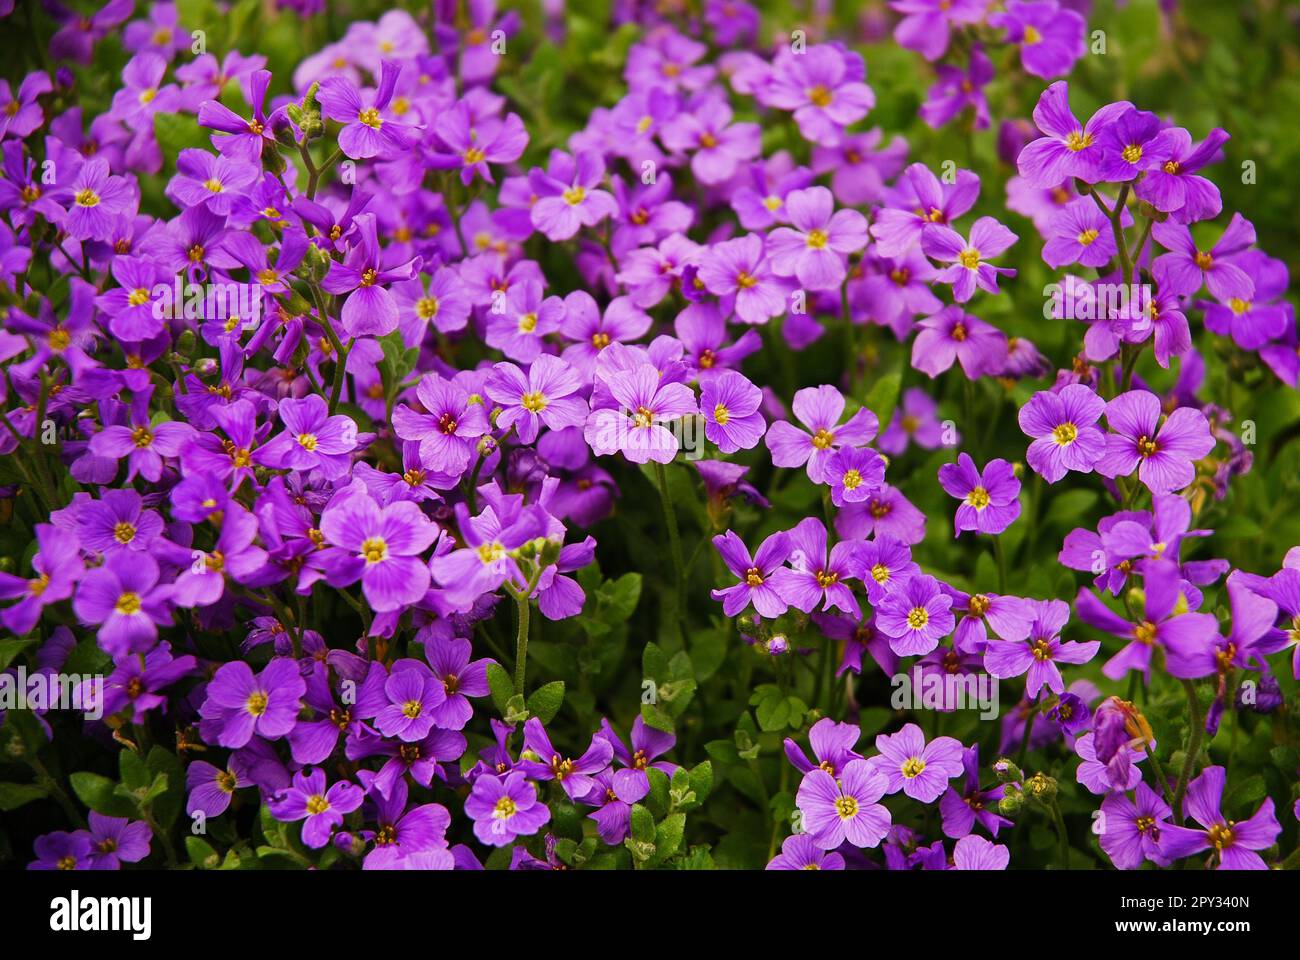 Aubrieta deltoidea known as lilacbush, purple rock cress and rainbow rock cress. A flower that blooms purple in the spring. Stock Photo